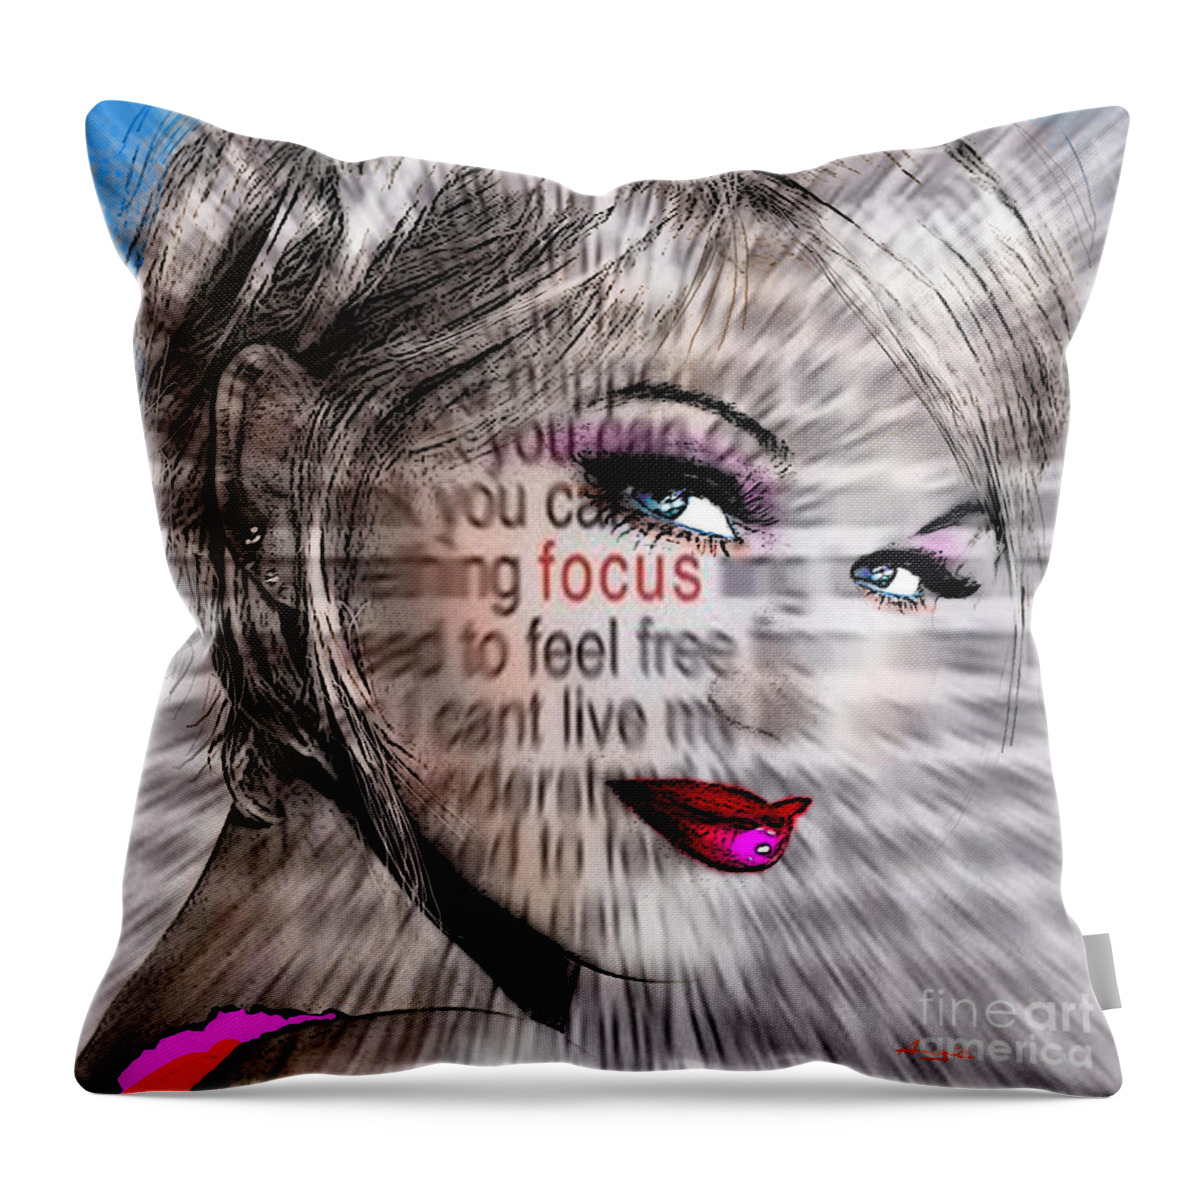 Painting Throw Pillow featuring the digital art Look At Me by Angie Braun